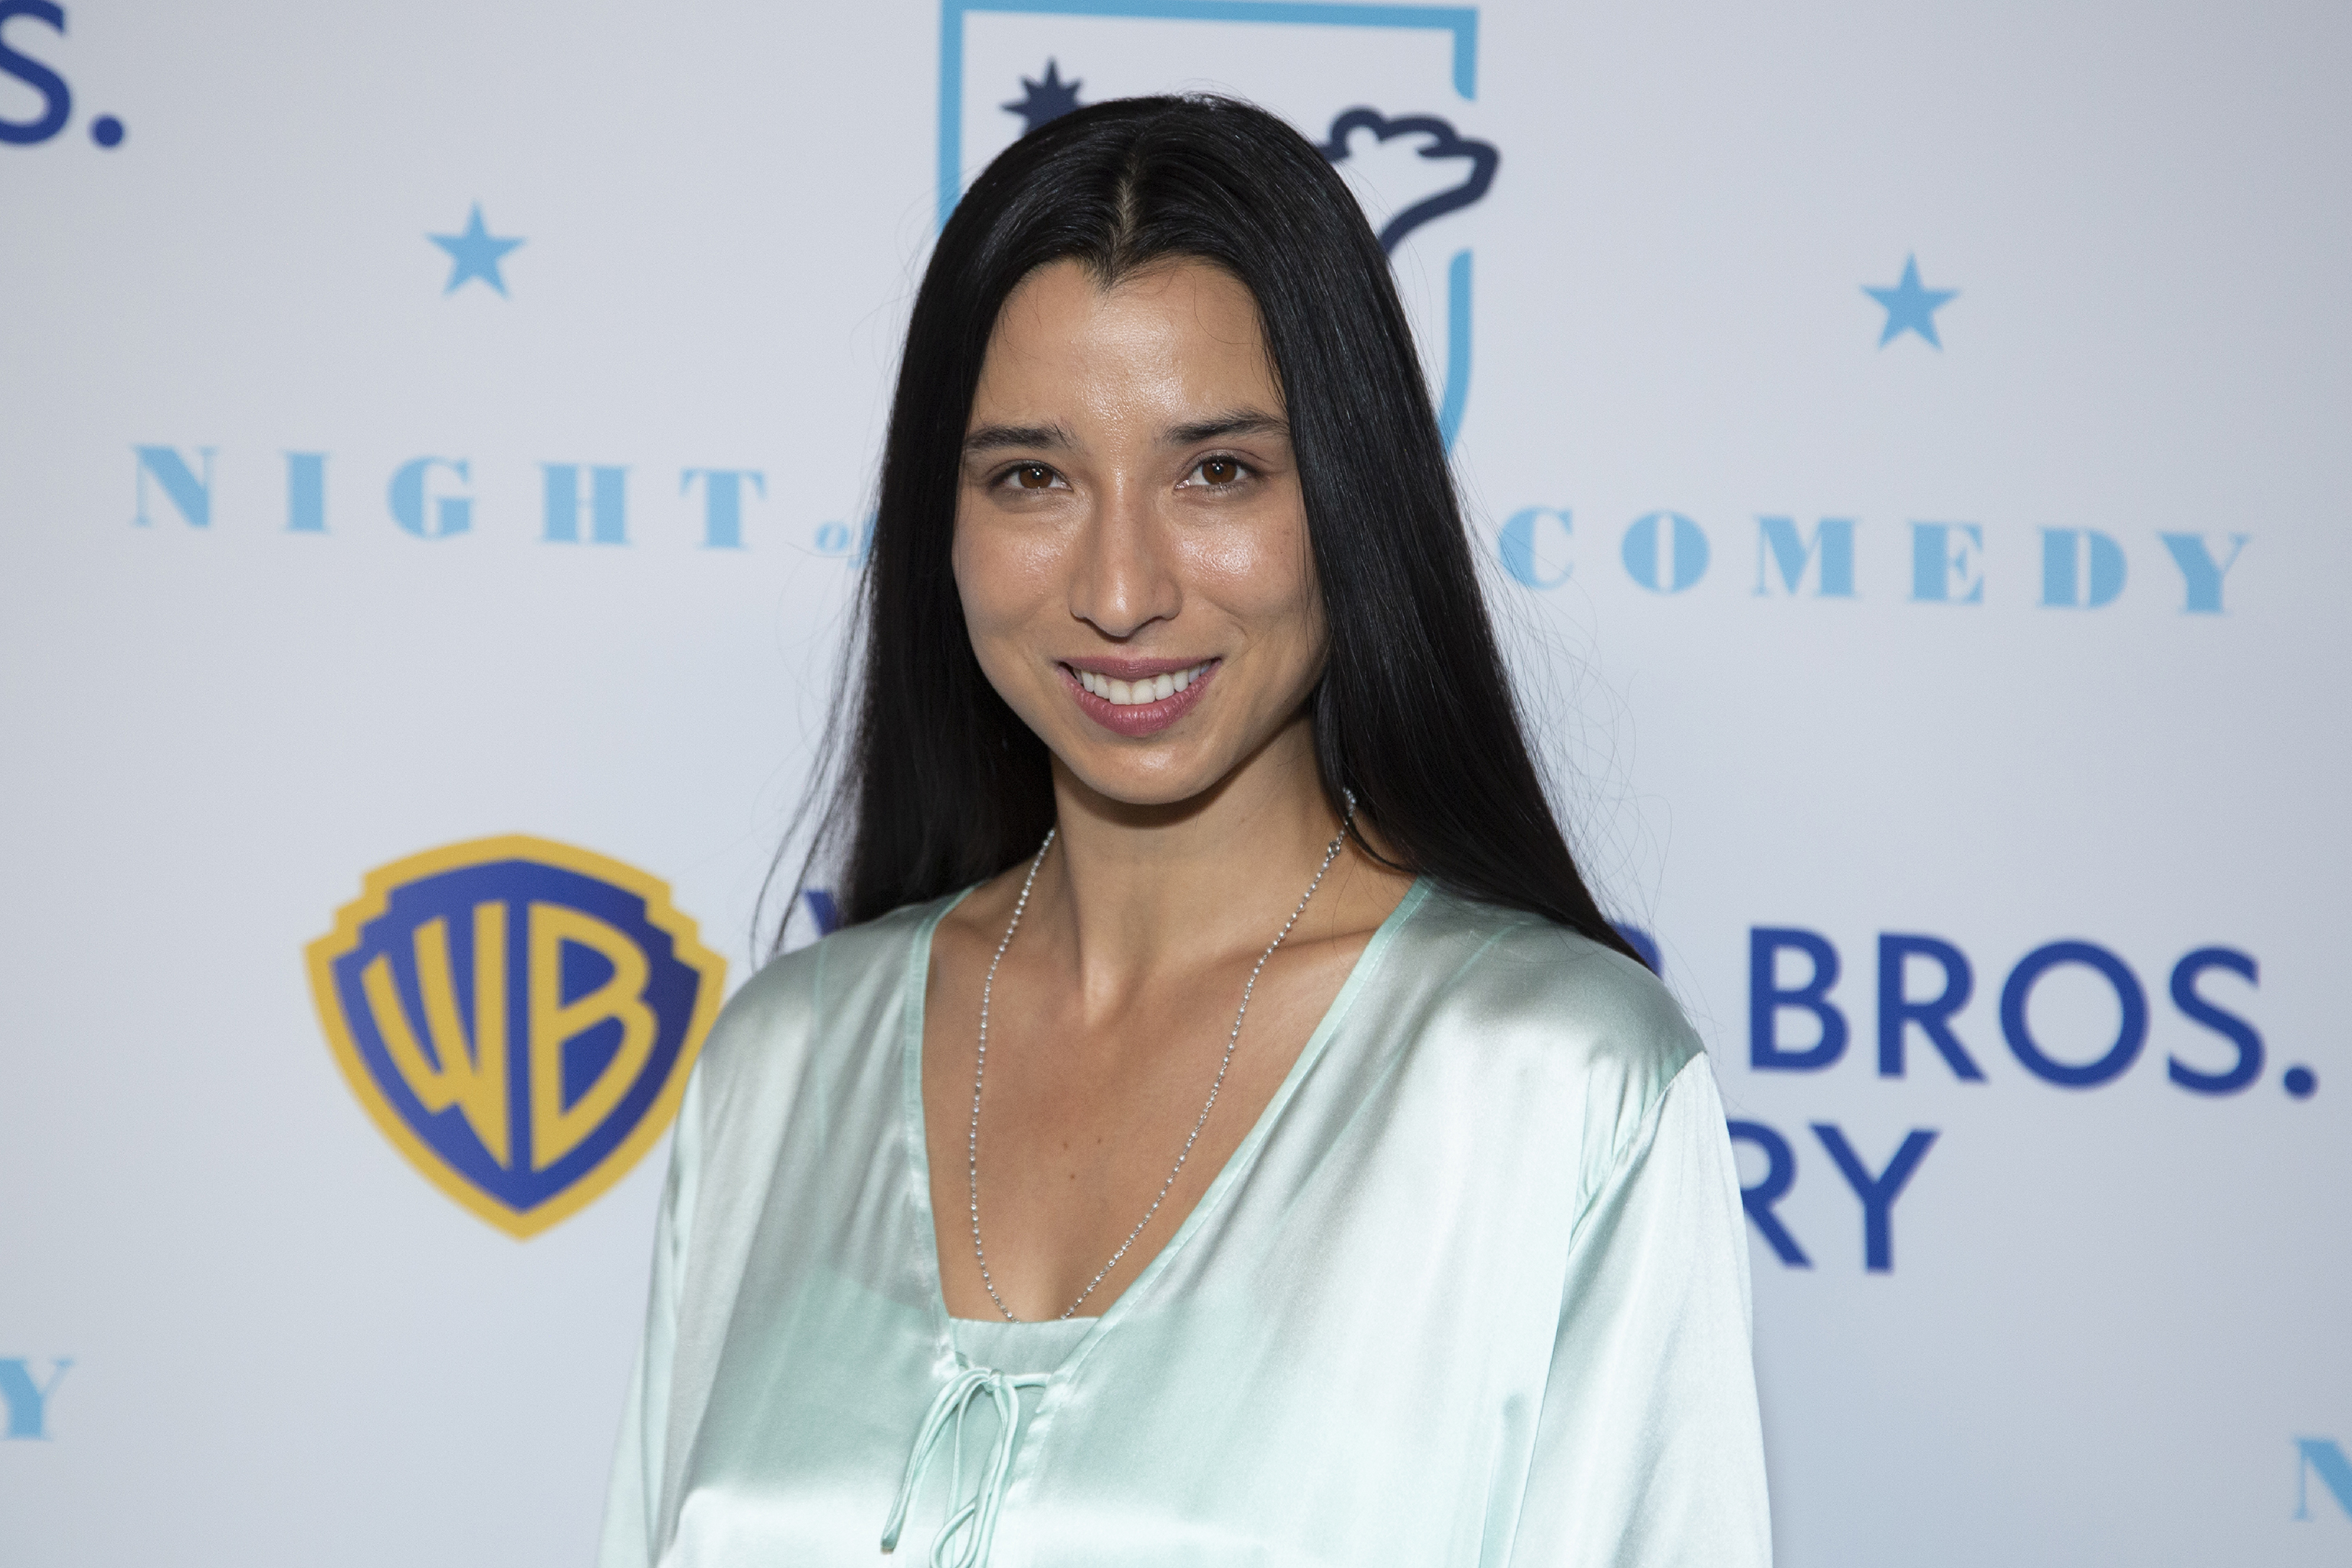 Lily Kwong attends NRDC's "Night Of Comedy" Honoring Anna Scott Carter at Casa Cipriani on September 20, 2022, in New York City. | Source: Getty Images